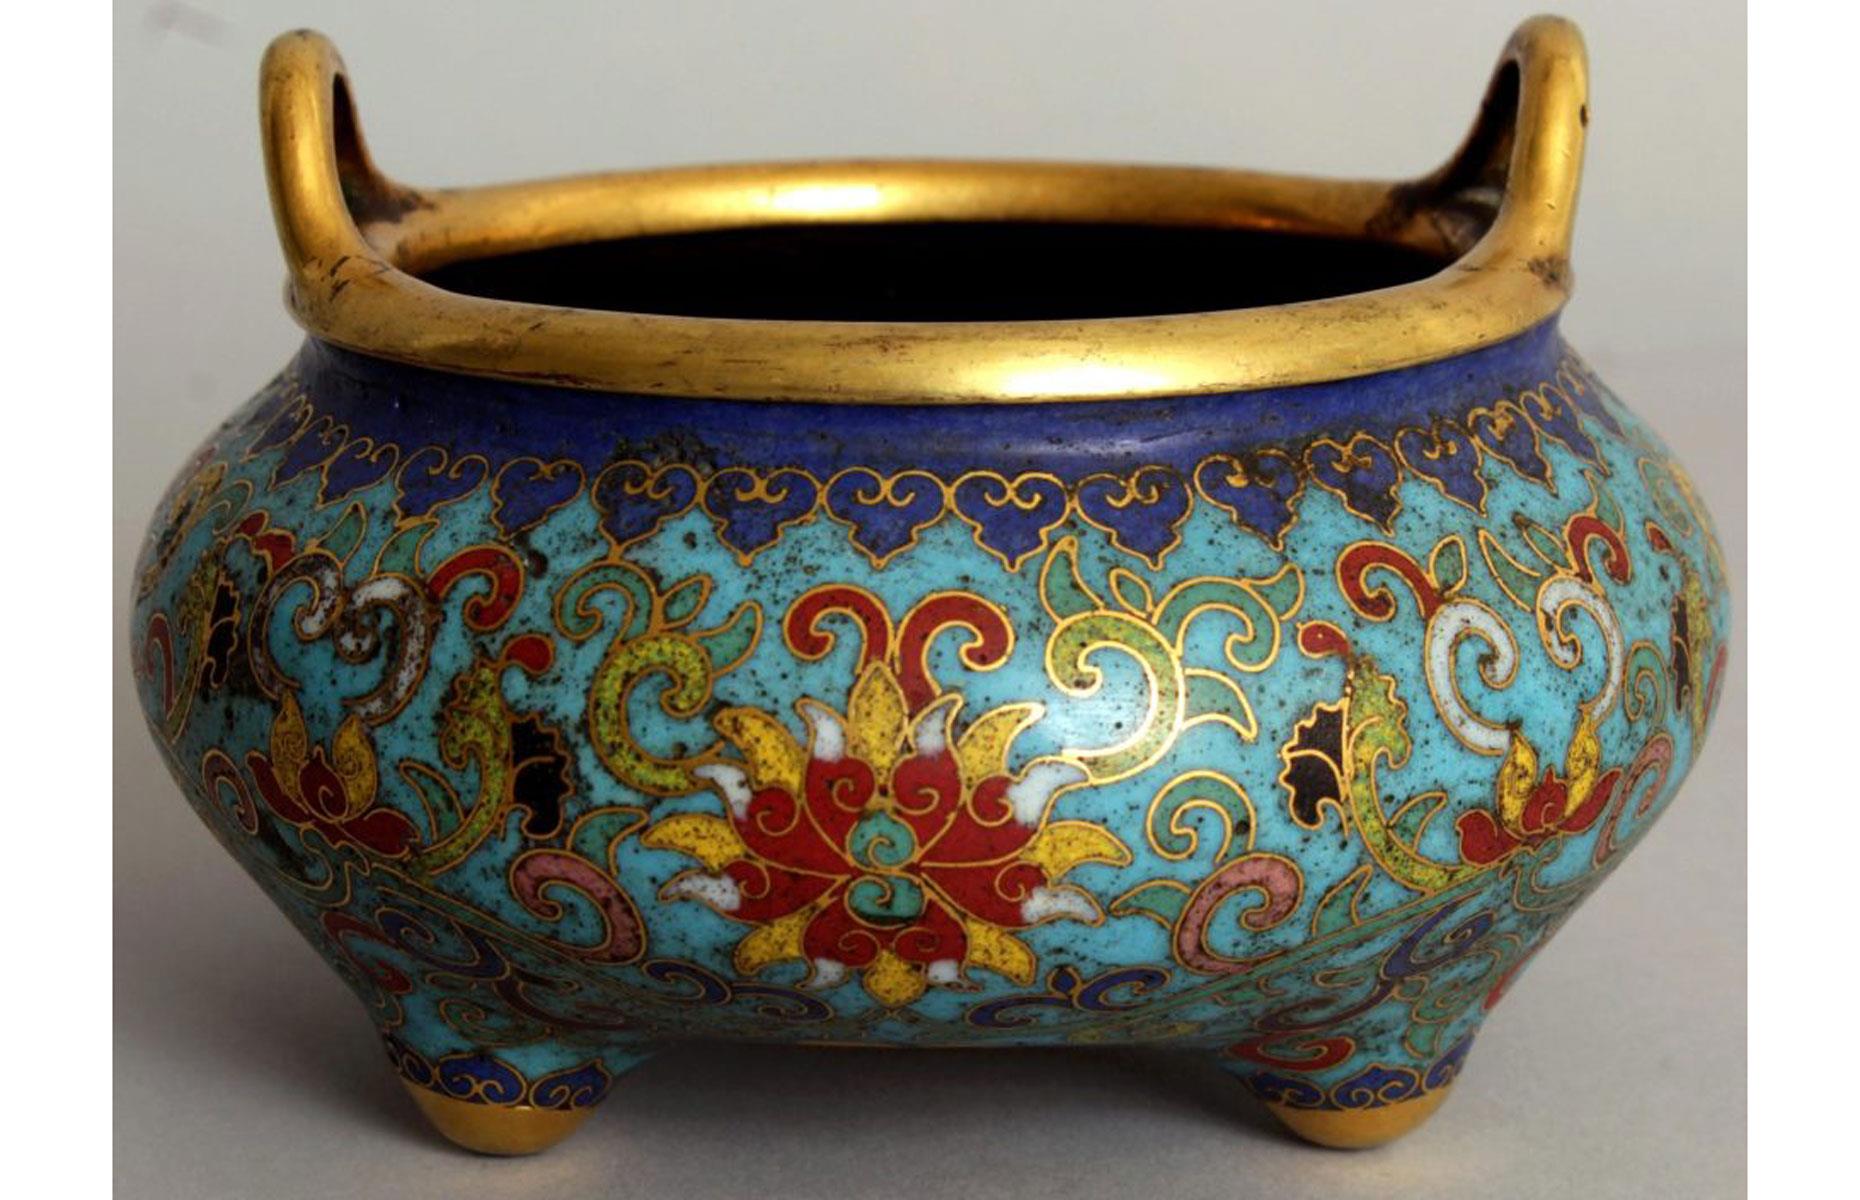 The 18th-century Chinese bowl